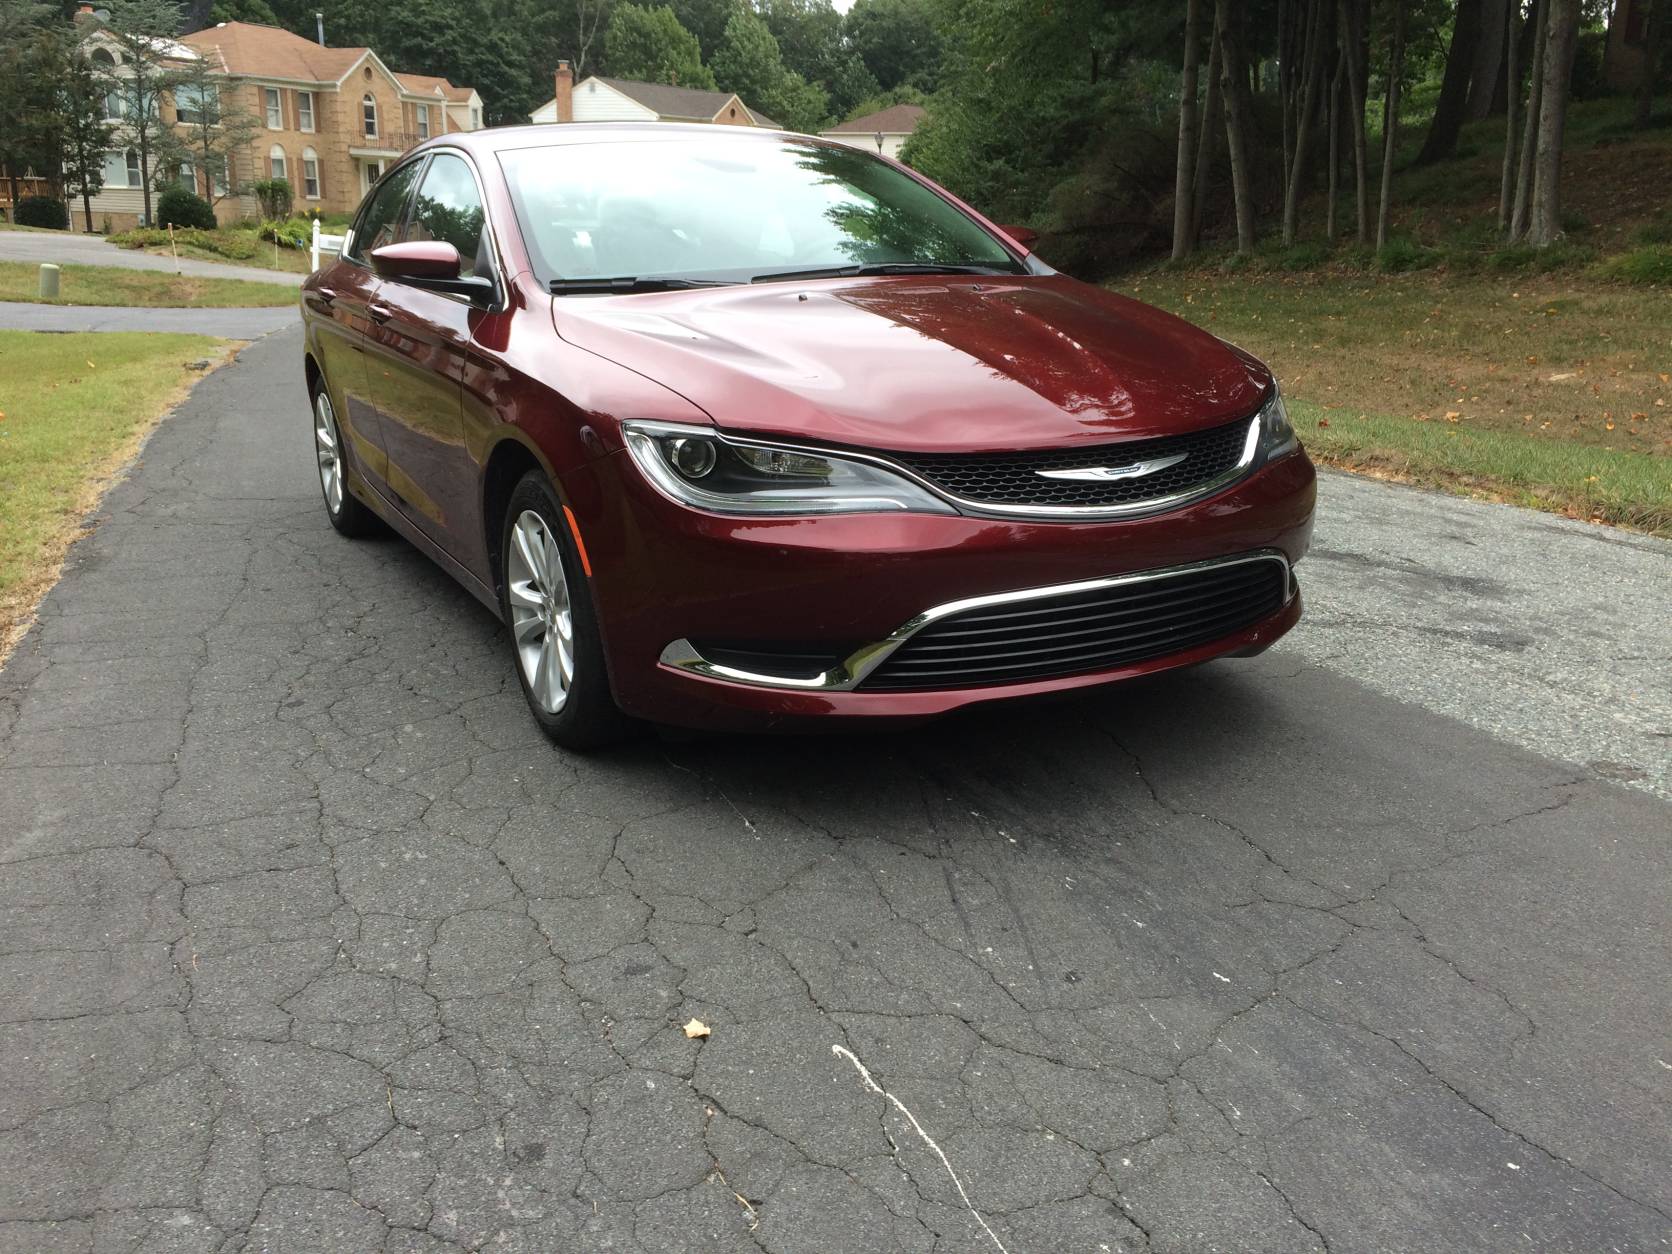 On the Chrysler 200 Limited Platinum, the V6 is an upcharge of nearly $2,000. Still, with a base price of $24,490, the price isn’t very high for what you get. (WTOP/Mike Parris)